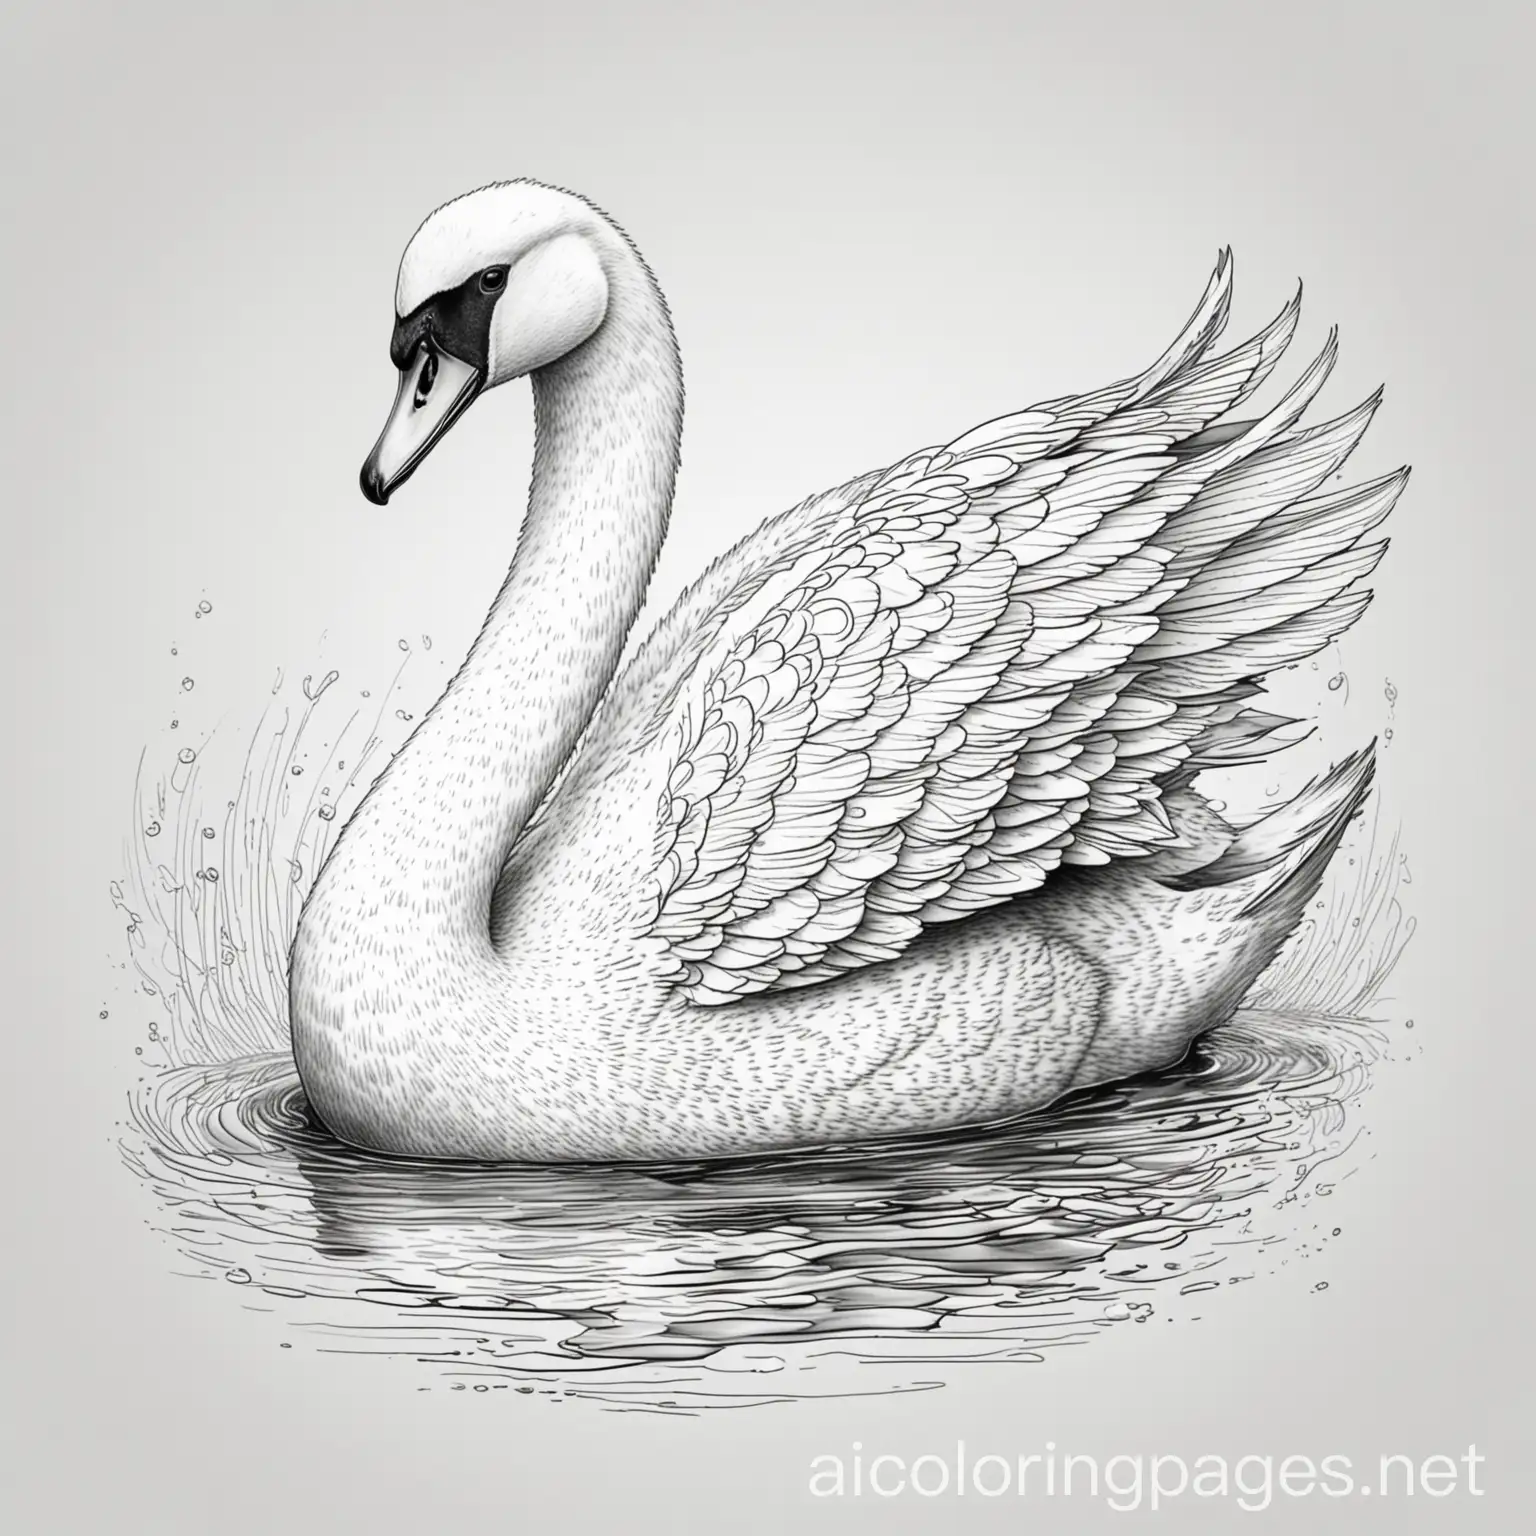 swan, Coloring Page, black and white, line art, white background, Simplicity, Ample White Space. The background of the coloring page is plain white to make it easy for young children to color within the lines. The outlines of all the subjects are easy to distinguish, making it simple for kids to color without too much difficulty